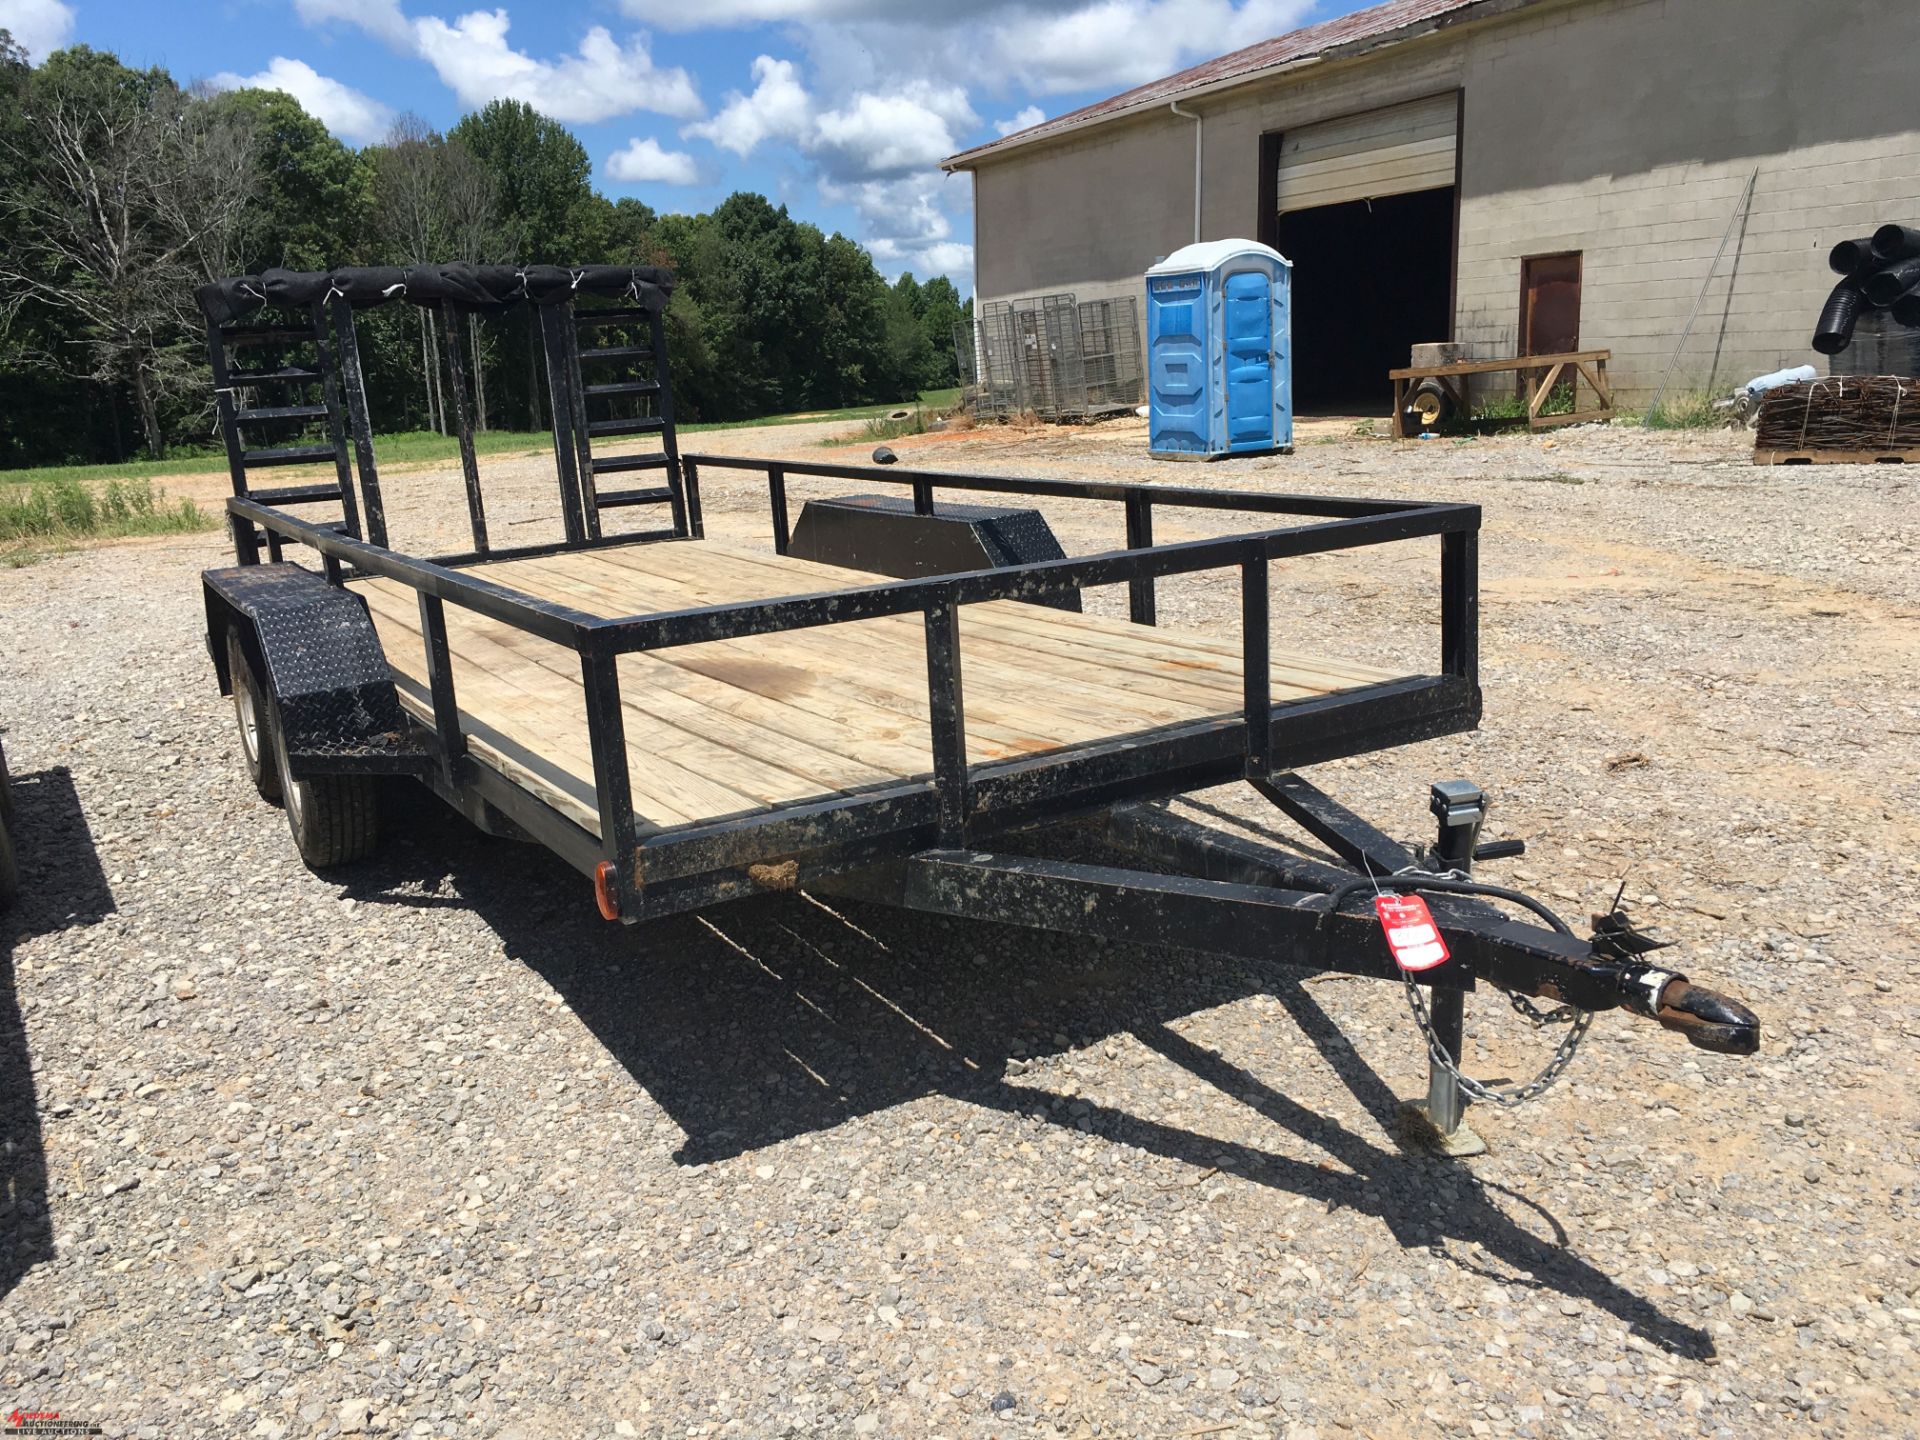 16' TRAILER, WITH WOOD DECK, FOLD DOWN RAMPS, CUSTOM BUILT BY FARM, DOES NOT SELL WITH